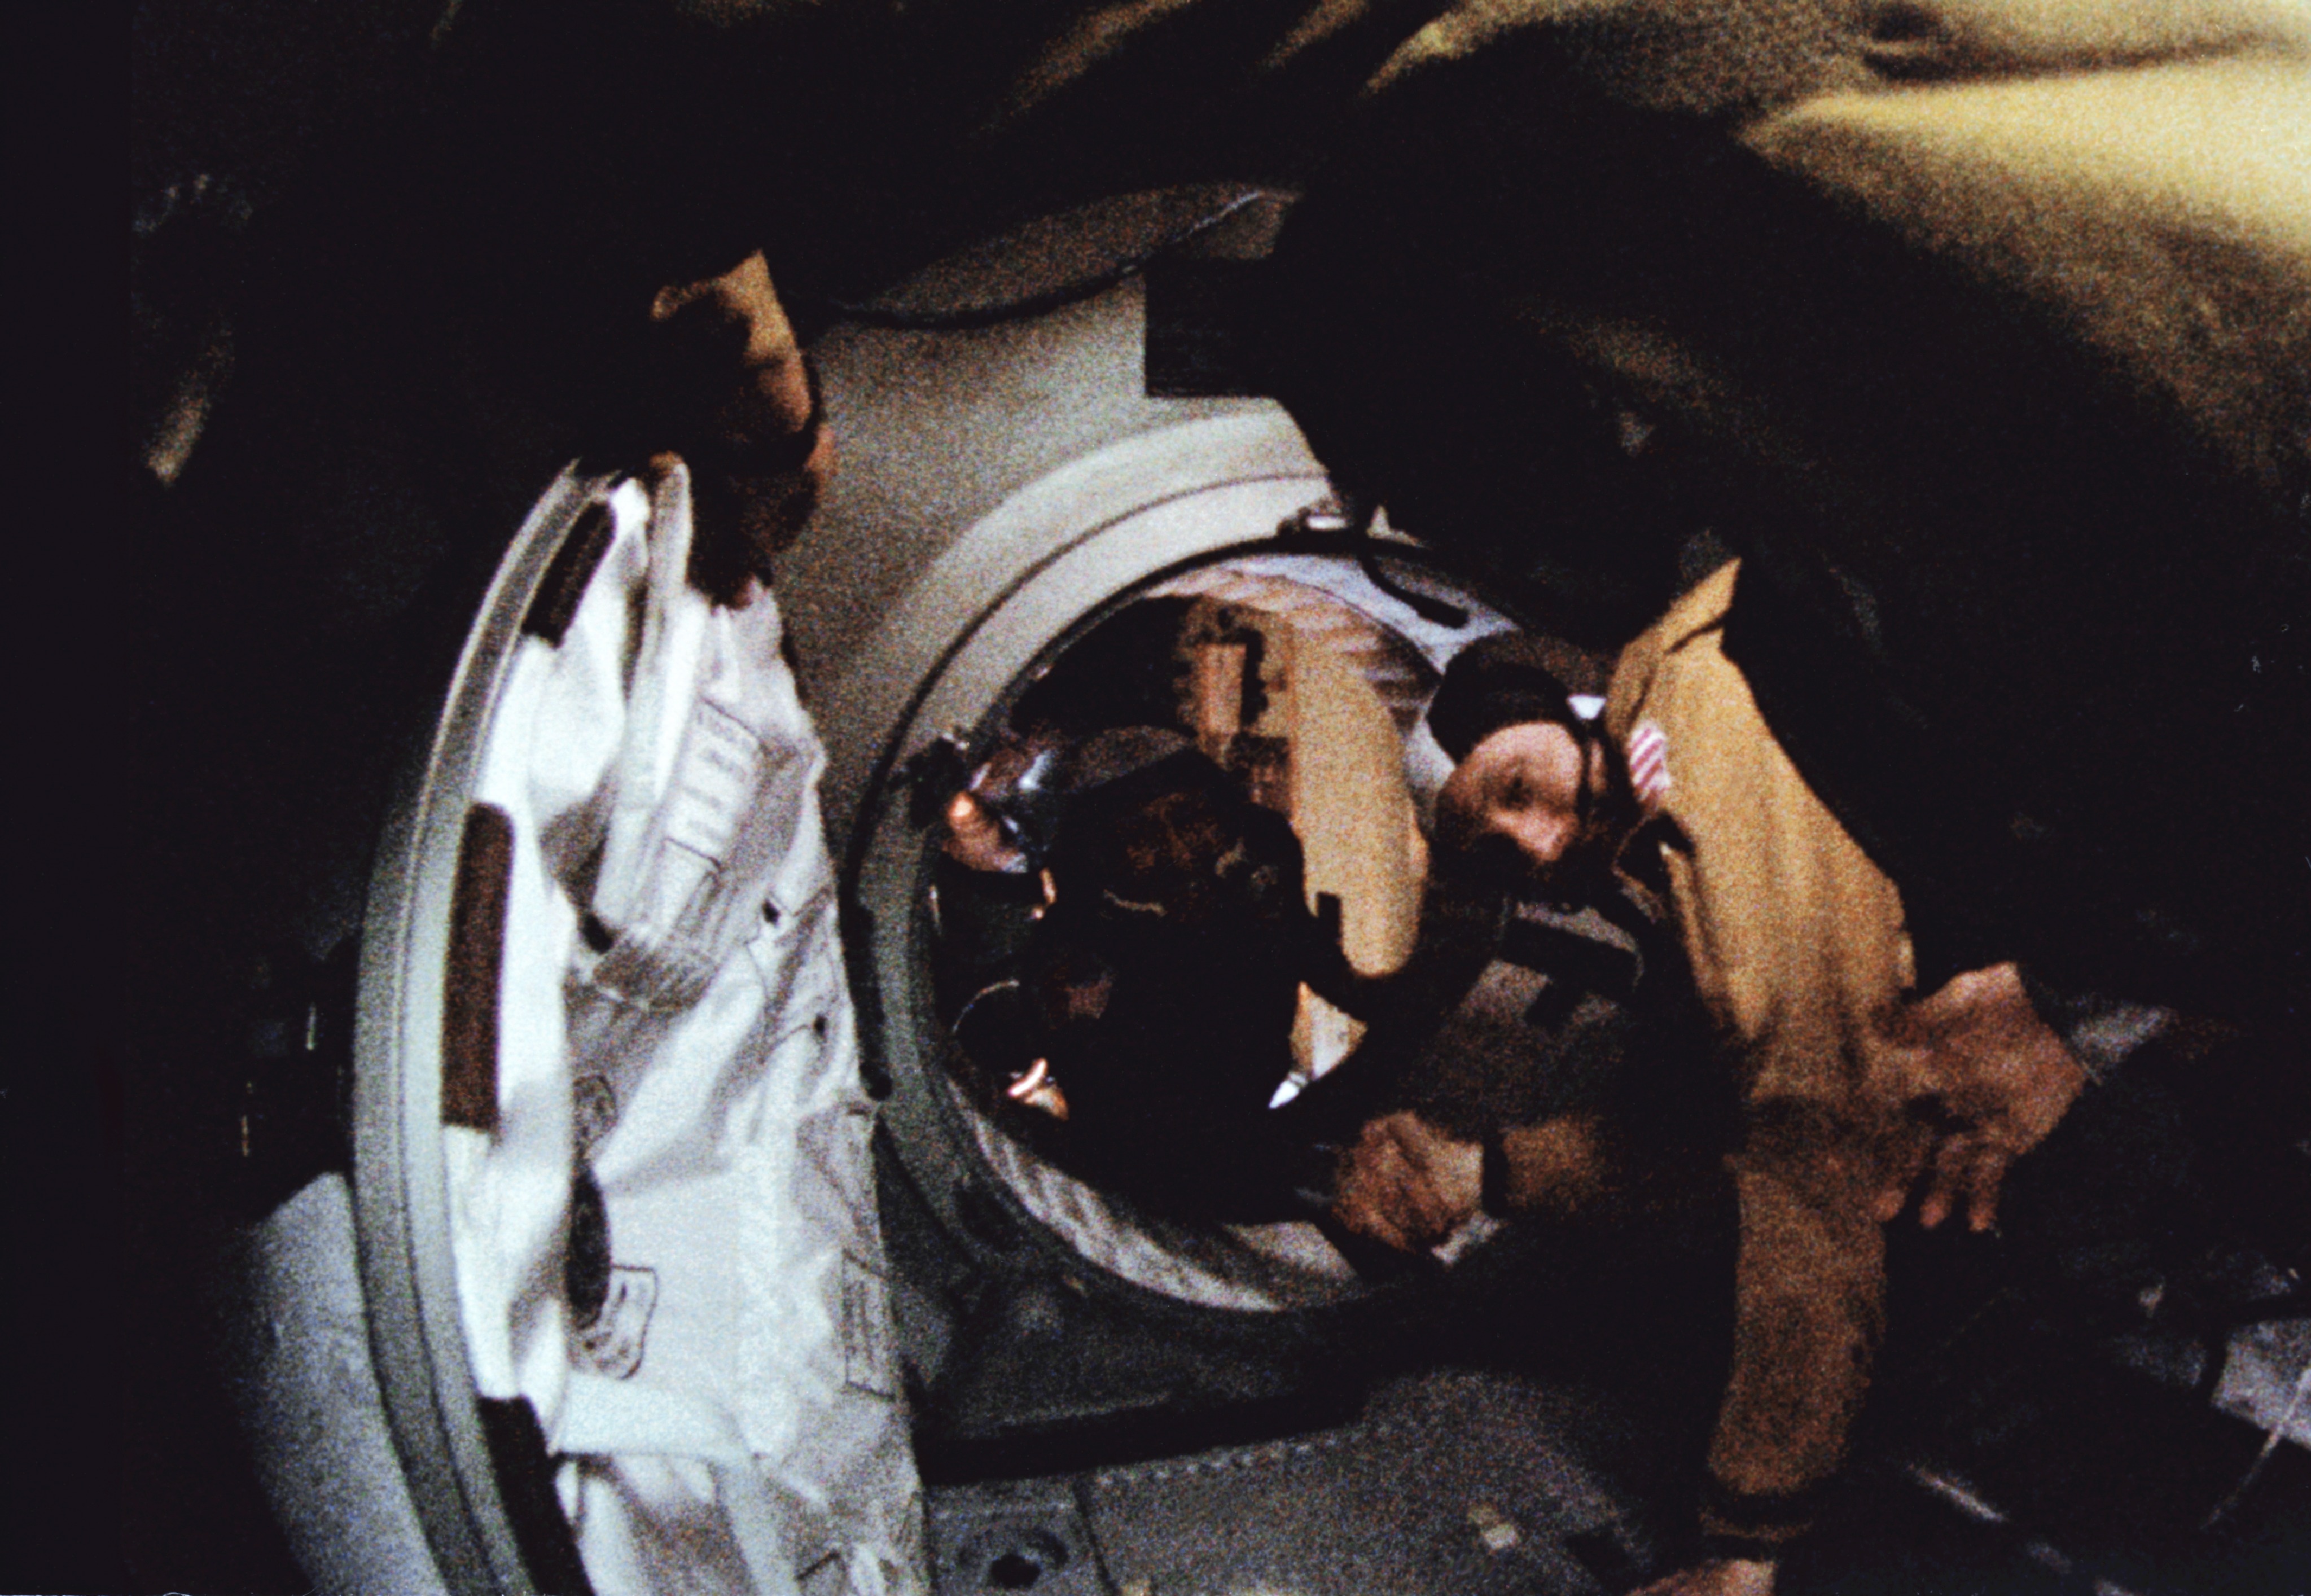 Tom Stafford (right) shakes hands with his counterpart Alexei Leonov in the docking module tunnel on 17 July 1975. This grainy image represents the first serious effort at co-operation between the United States and Russia in human space exploration. Photo Credit: NASA